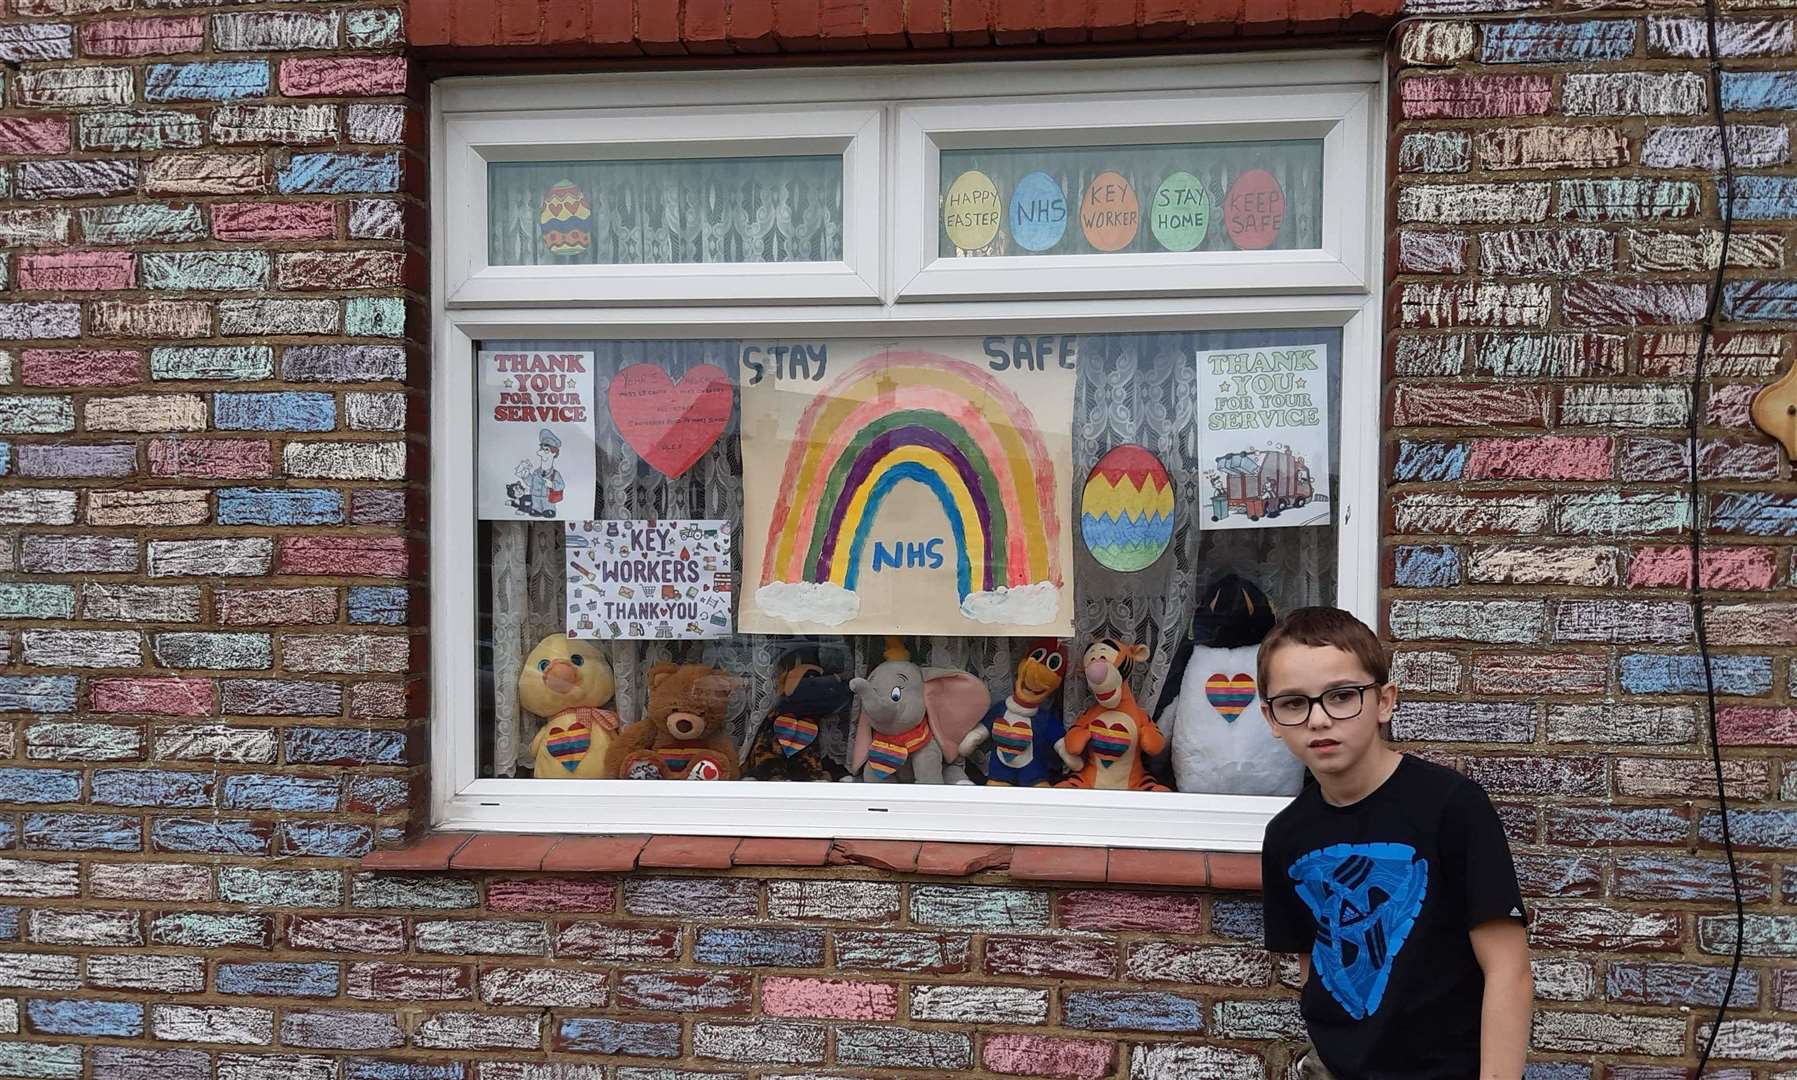 Many people have been putting rainbows in their windows to cheer up others during the lockdown, such as Rex Glover, 10, from Sittingbourne